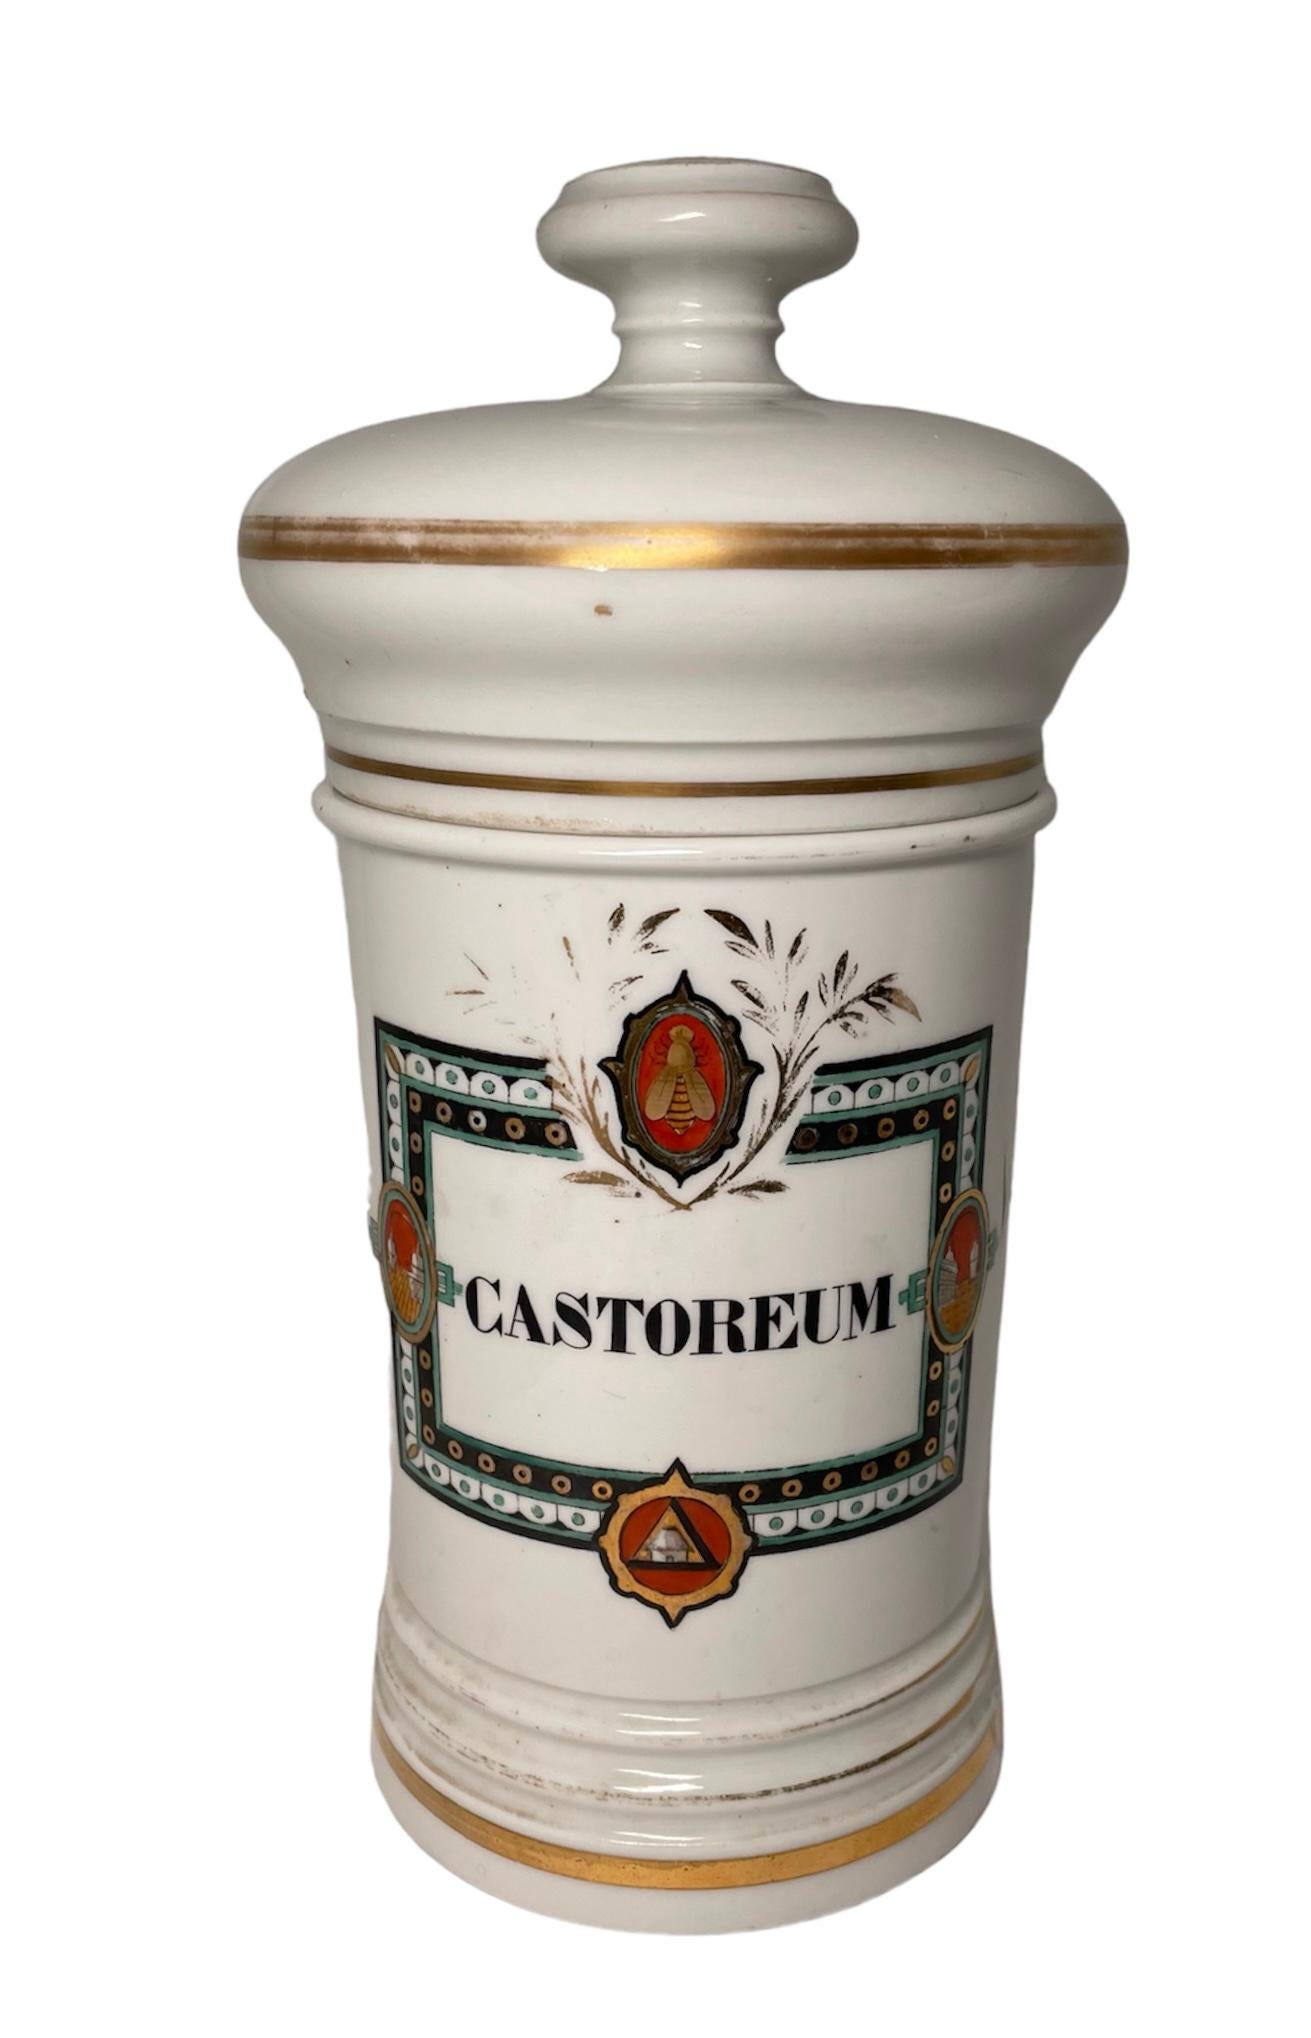 This is a French Porcelain Apothecary Jar. It depicts a cylindrical lidded jar with white background hand painted in the front with a rectangular plaque with gold borders and the name in Latin, Castoreum. The borders of the plaque are hand painted